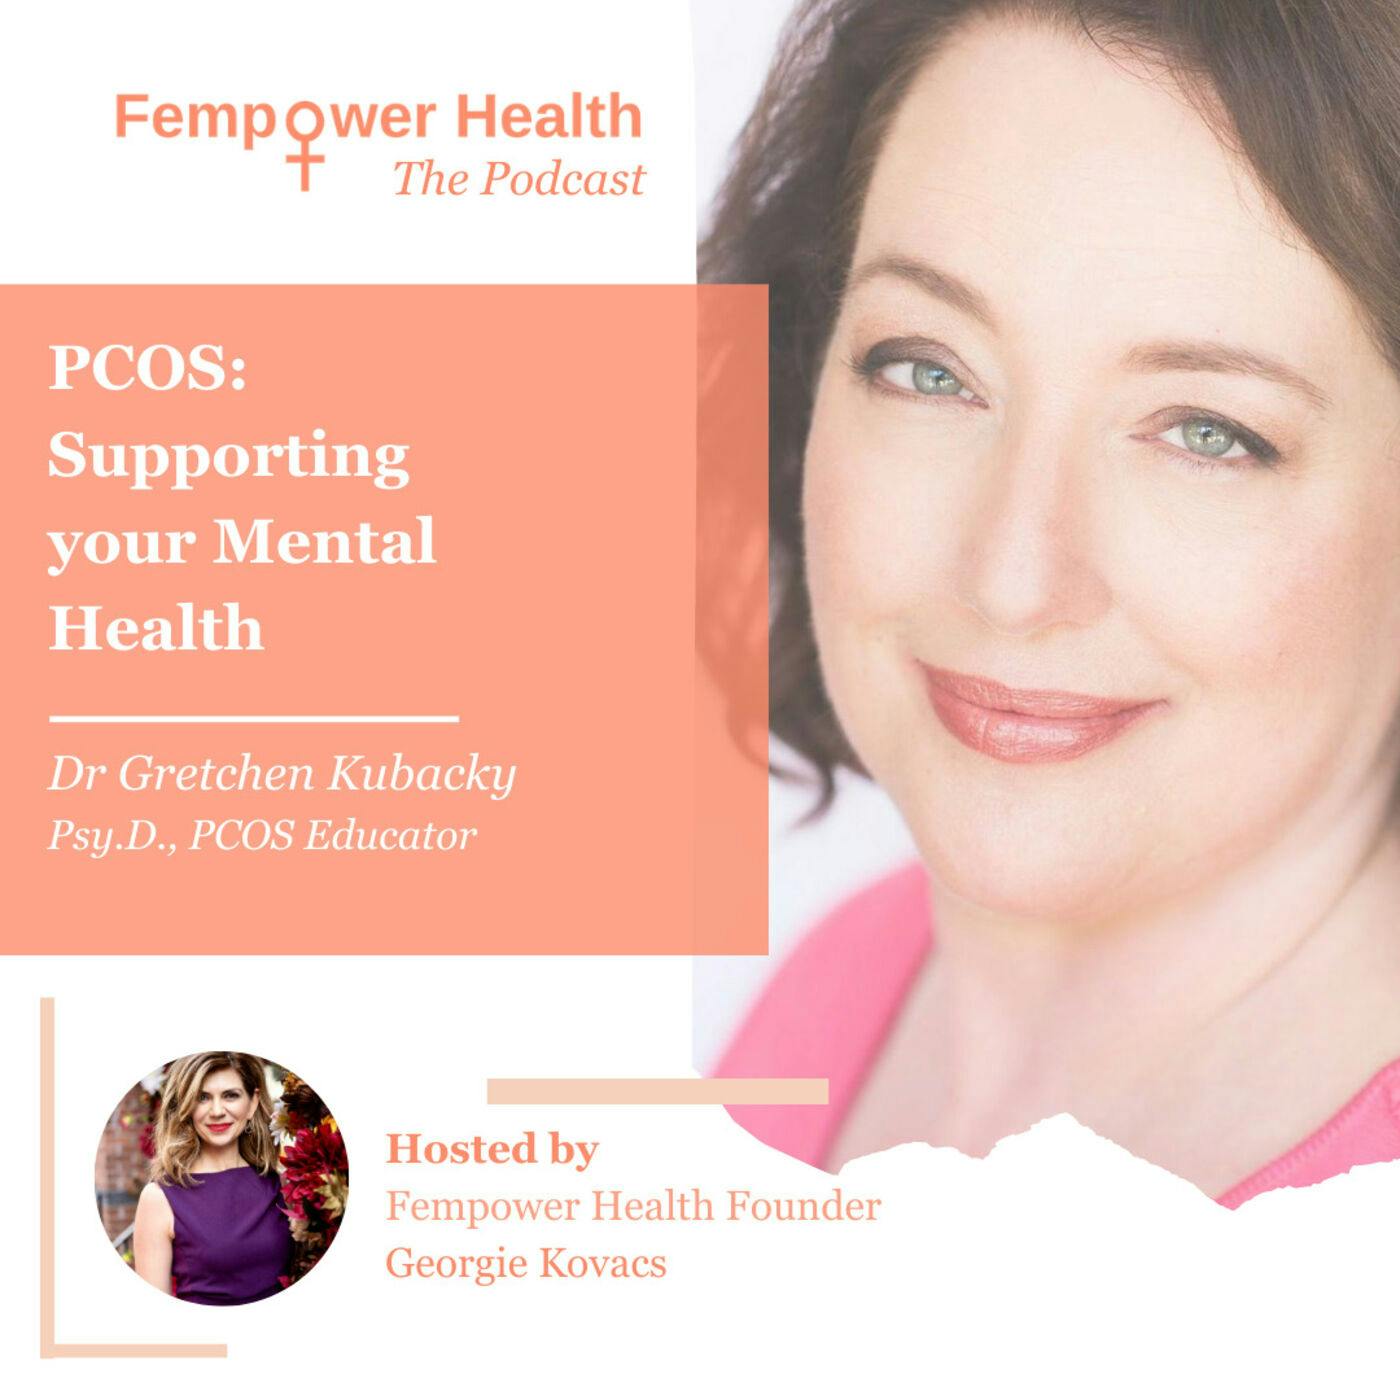 Dr. Gretchen Kubacky | PCOS:  Supporting your Mental Health